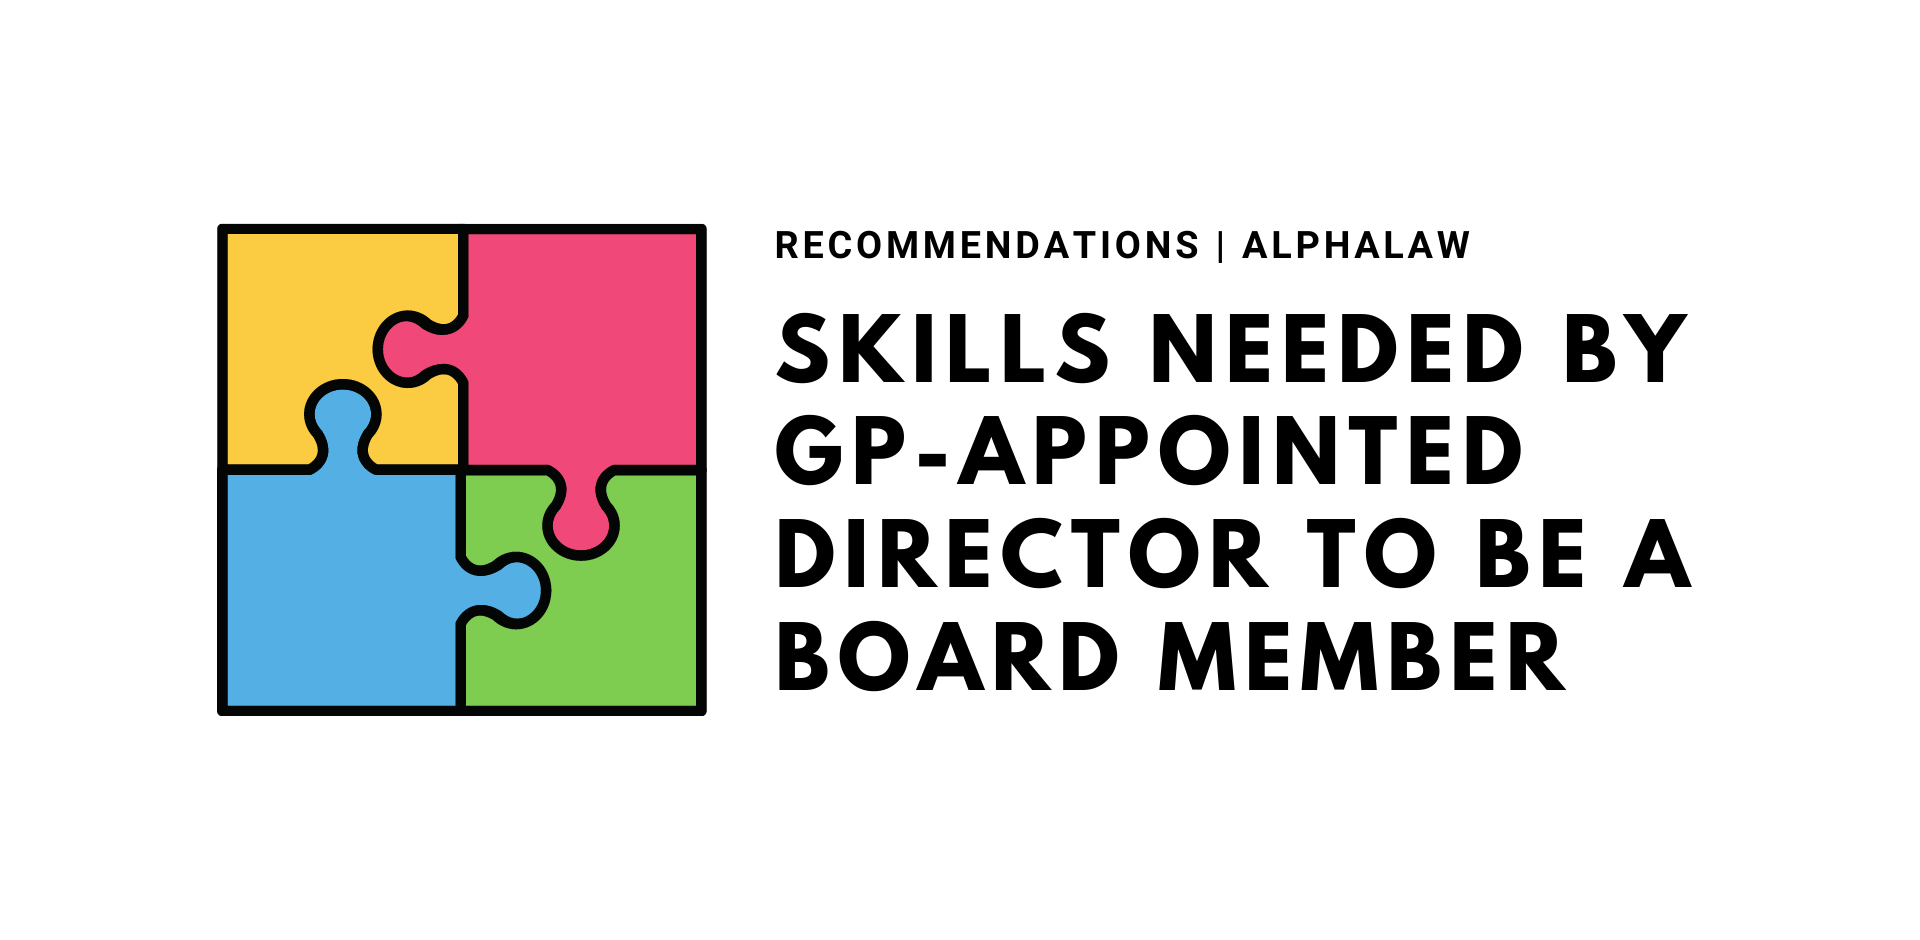 Skills Needed by GP-appointed Director to be a Board Member